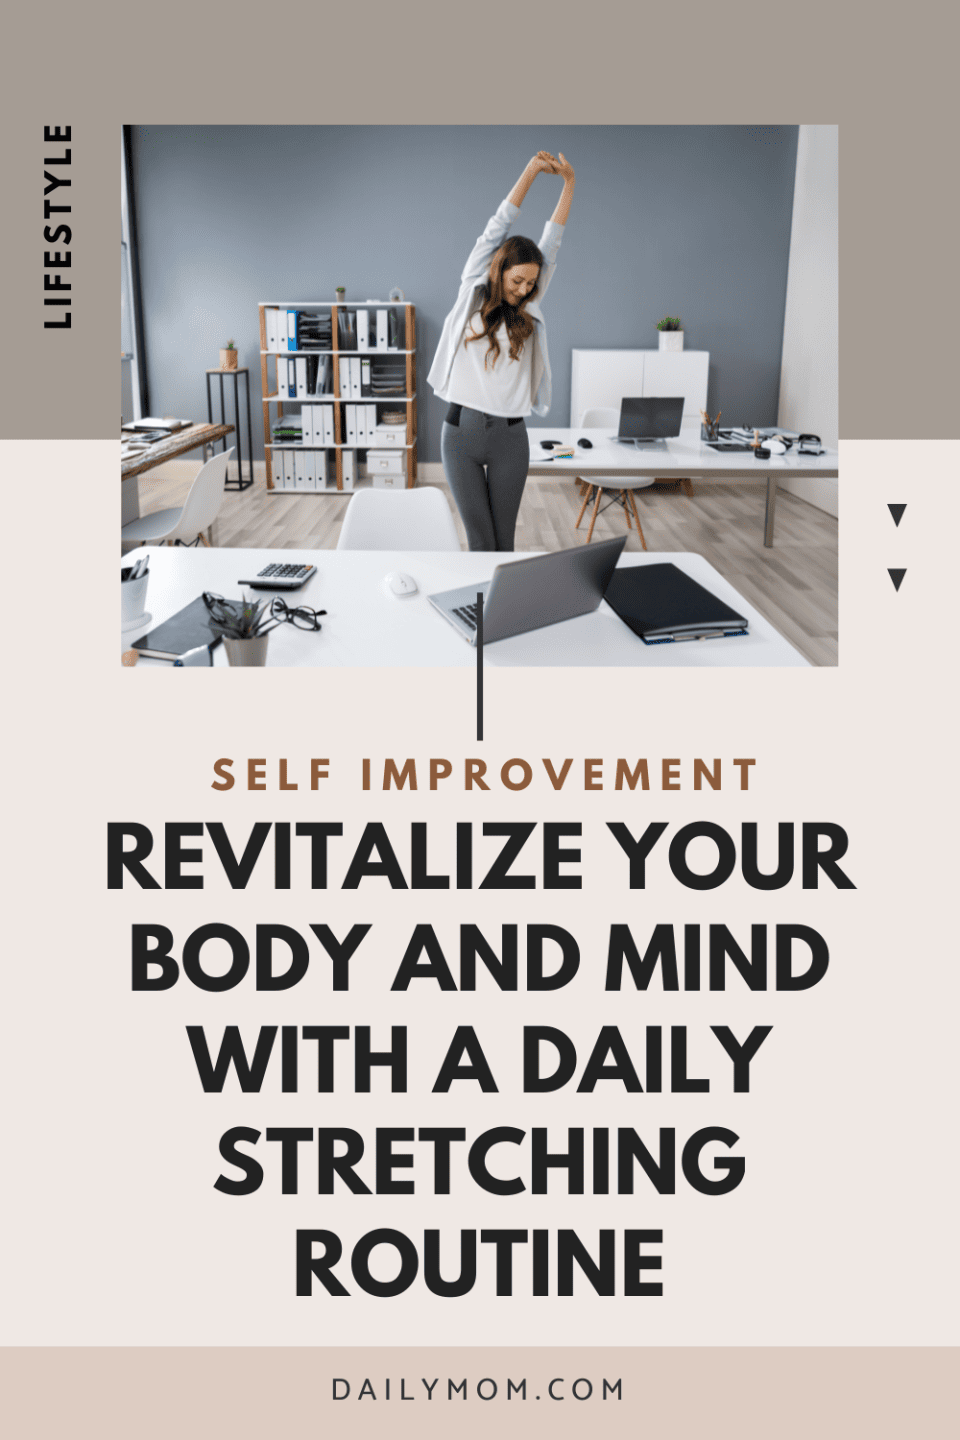 Revitalize Your Body And Mind With A Daily Stretching Routine 3 Daily Mom, Magazine For Families